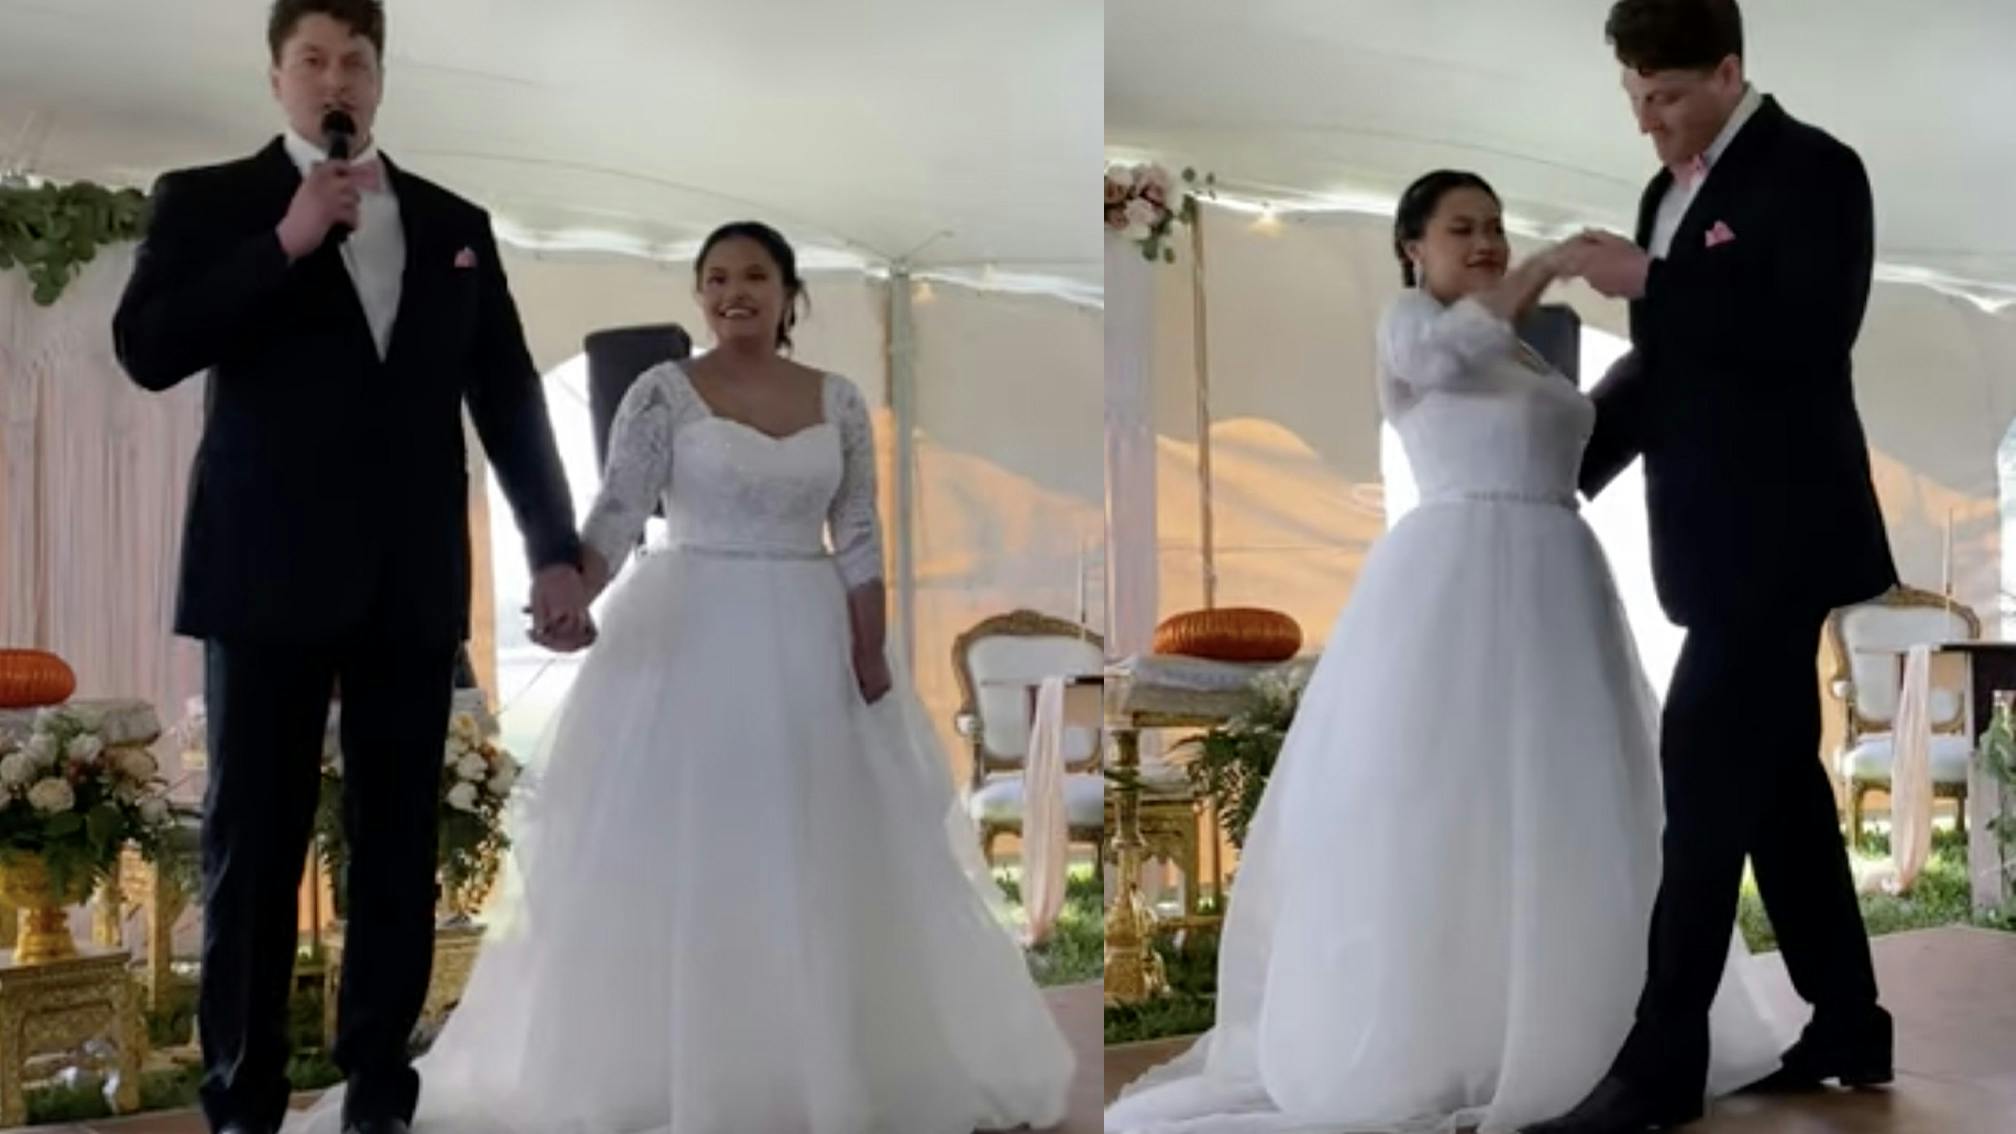 Watch: Awesome newlyweds' first wedding dance is Napalm Death’s You Suffer